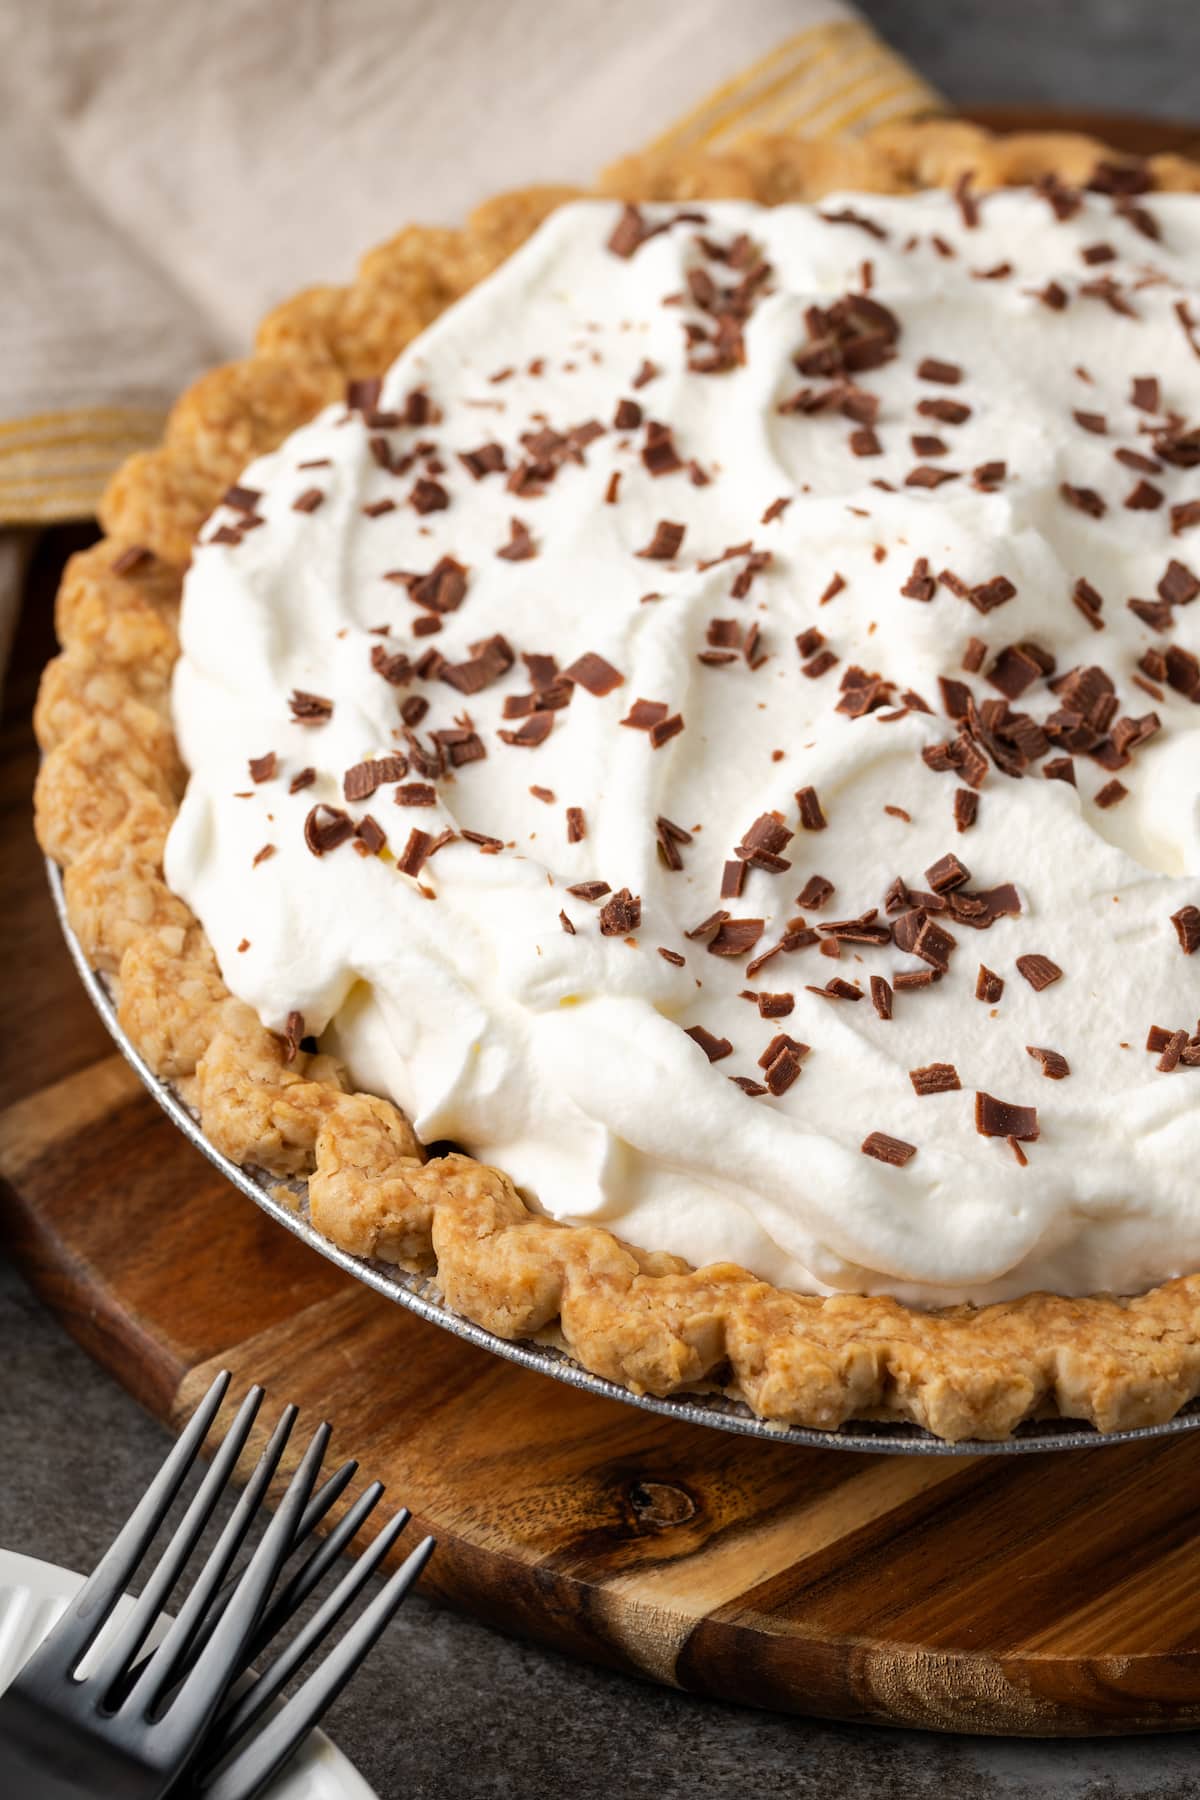 Chocolate pudding pie topped with whipped cream and chocolate shavings.